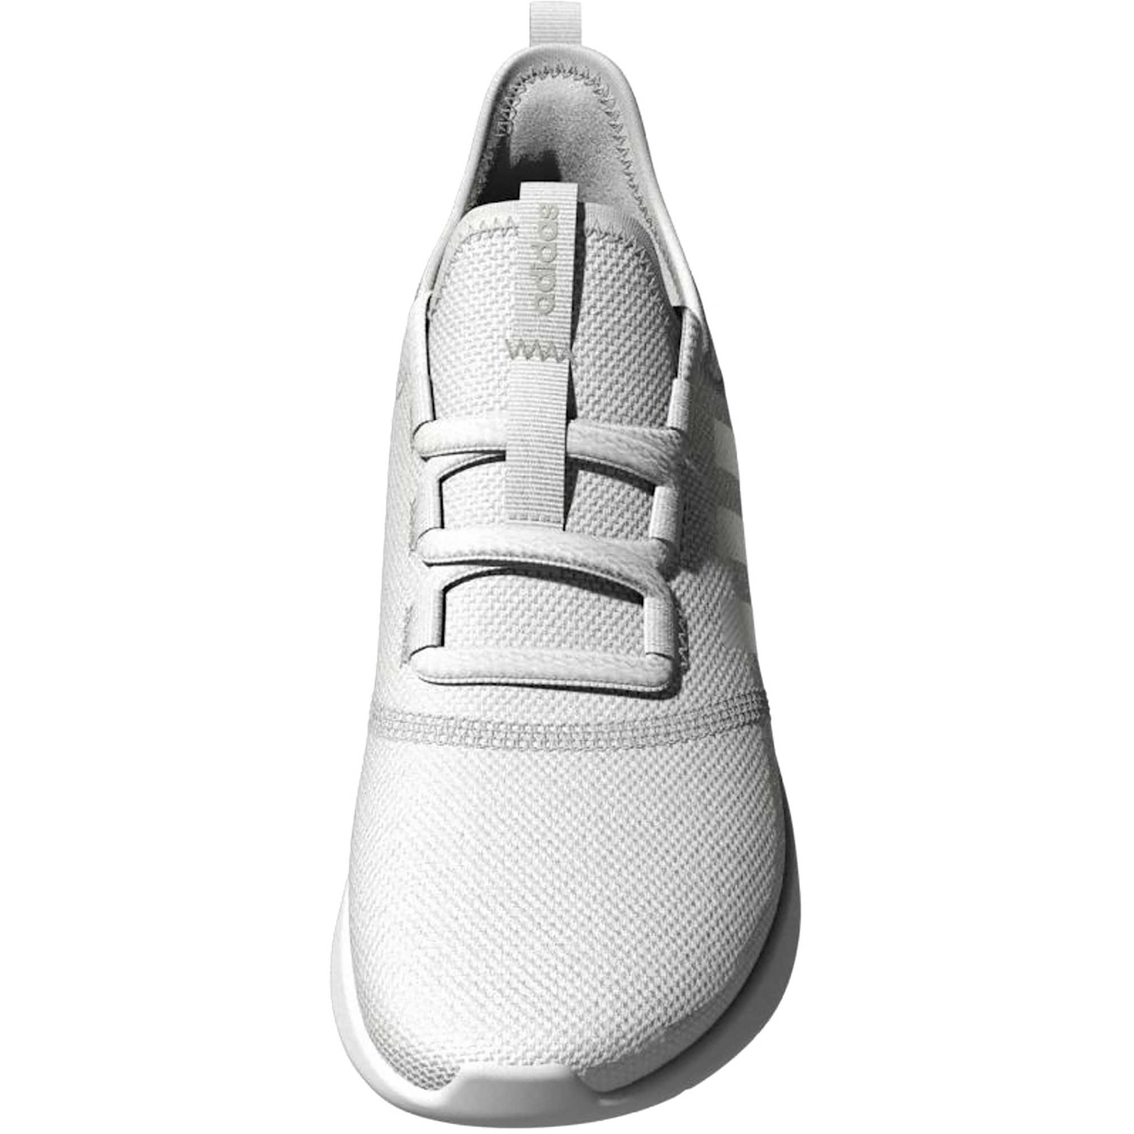 Adidas Women's Cloudfoam Pure 2.0 Sneakers - Image 5 of 10